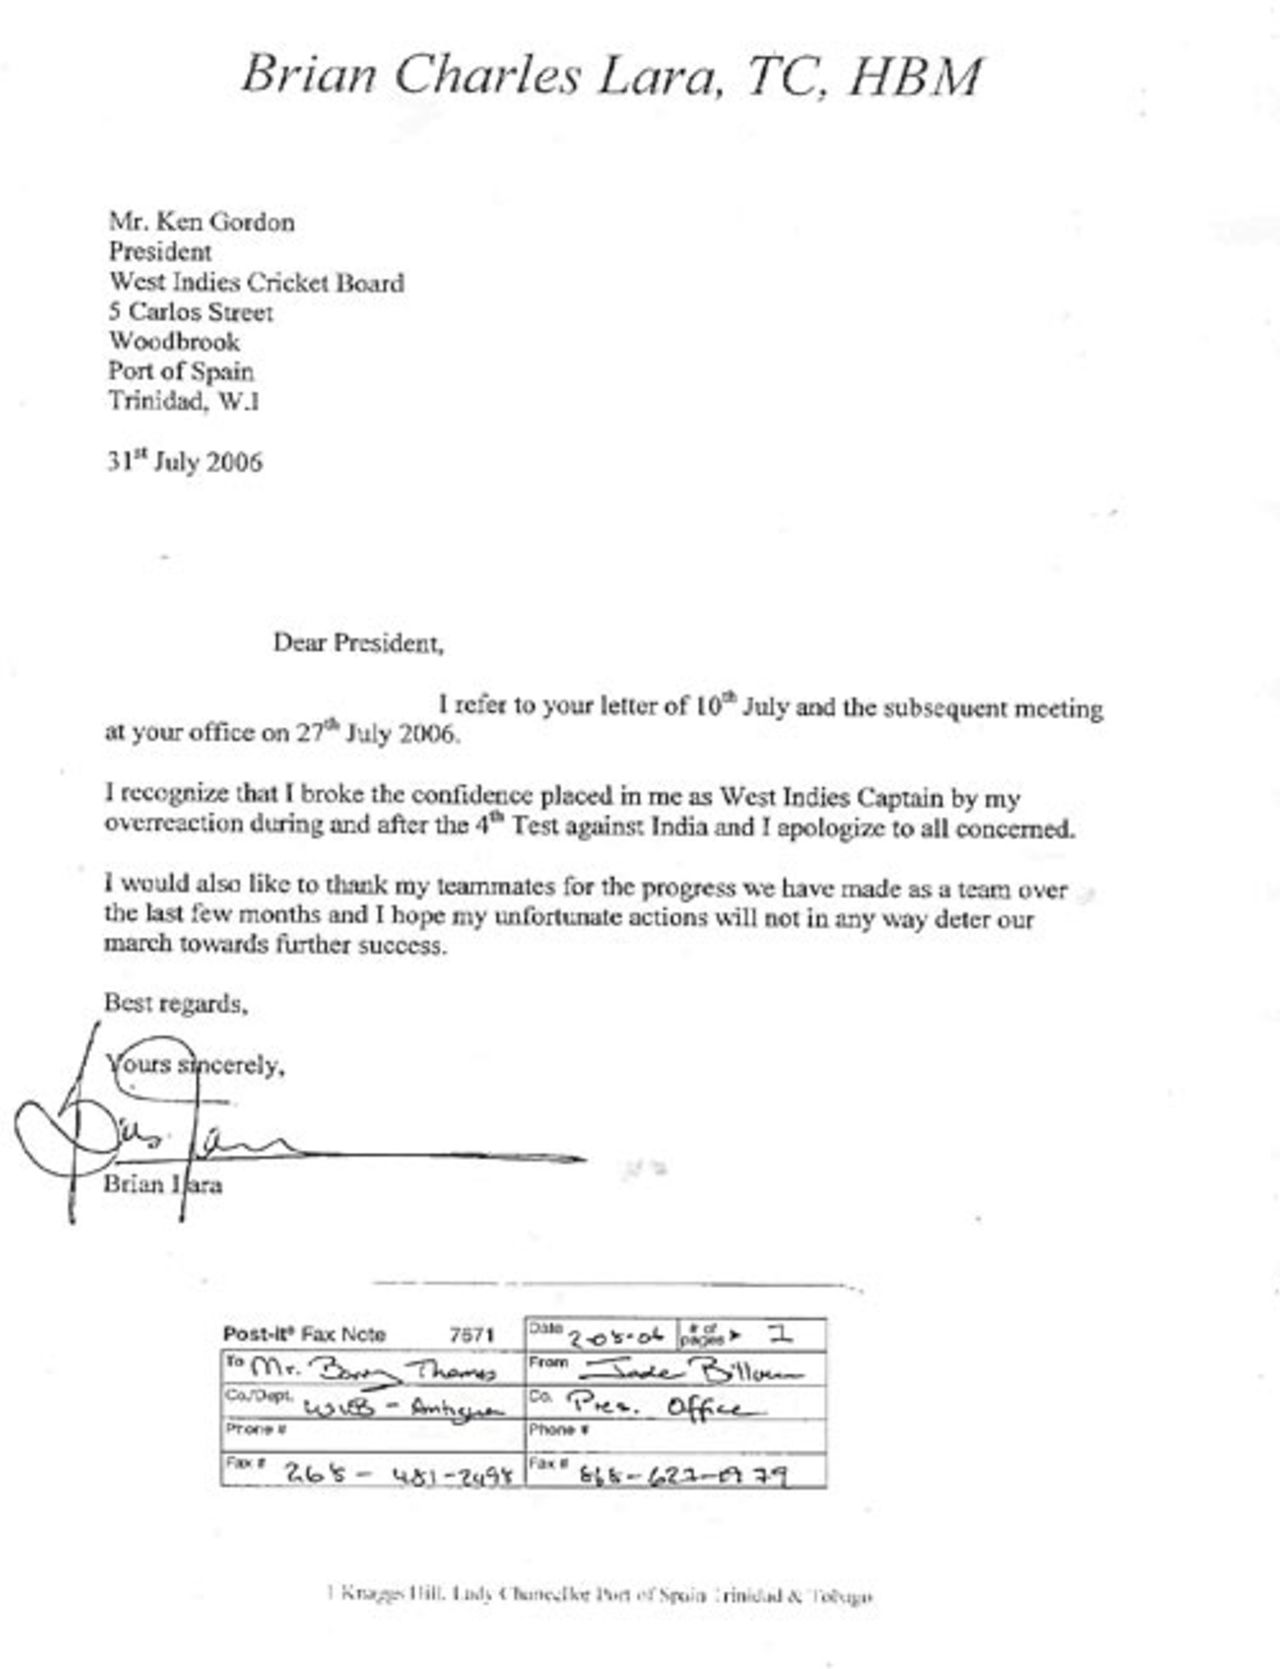 Faxed letter of apology from Brian Lara to WICB president Ken Gordon, August 2, 2006